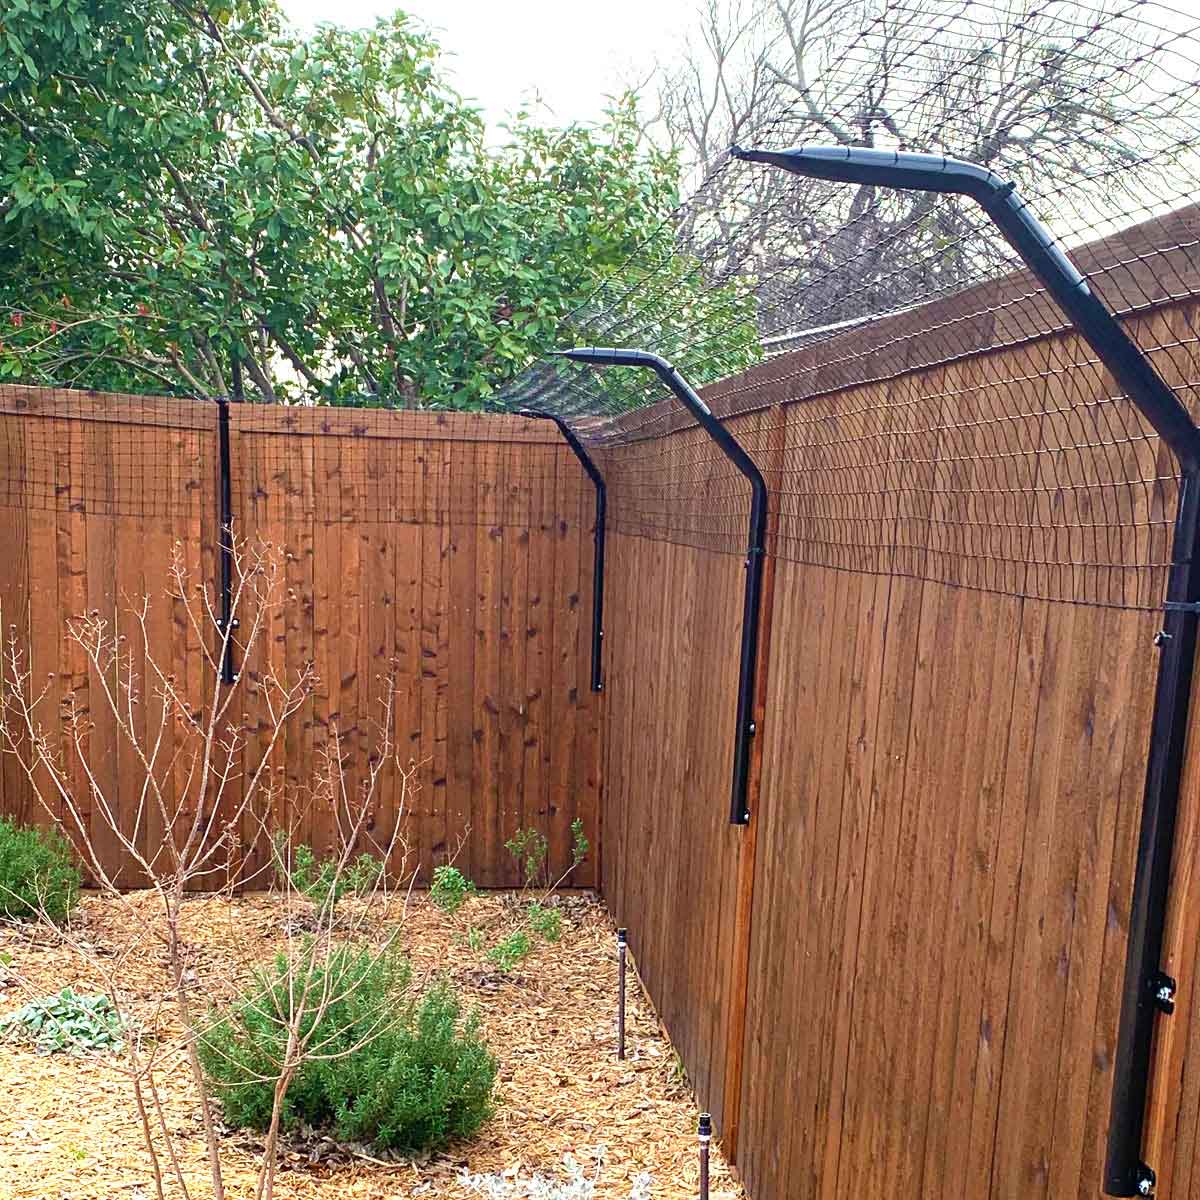 Fence topper system on a wooden fence